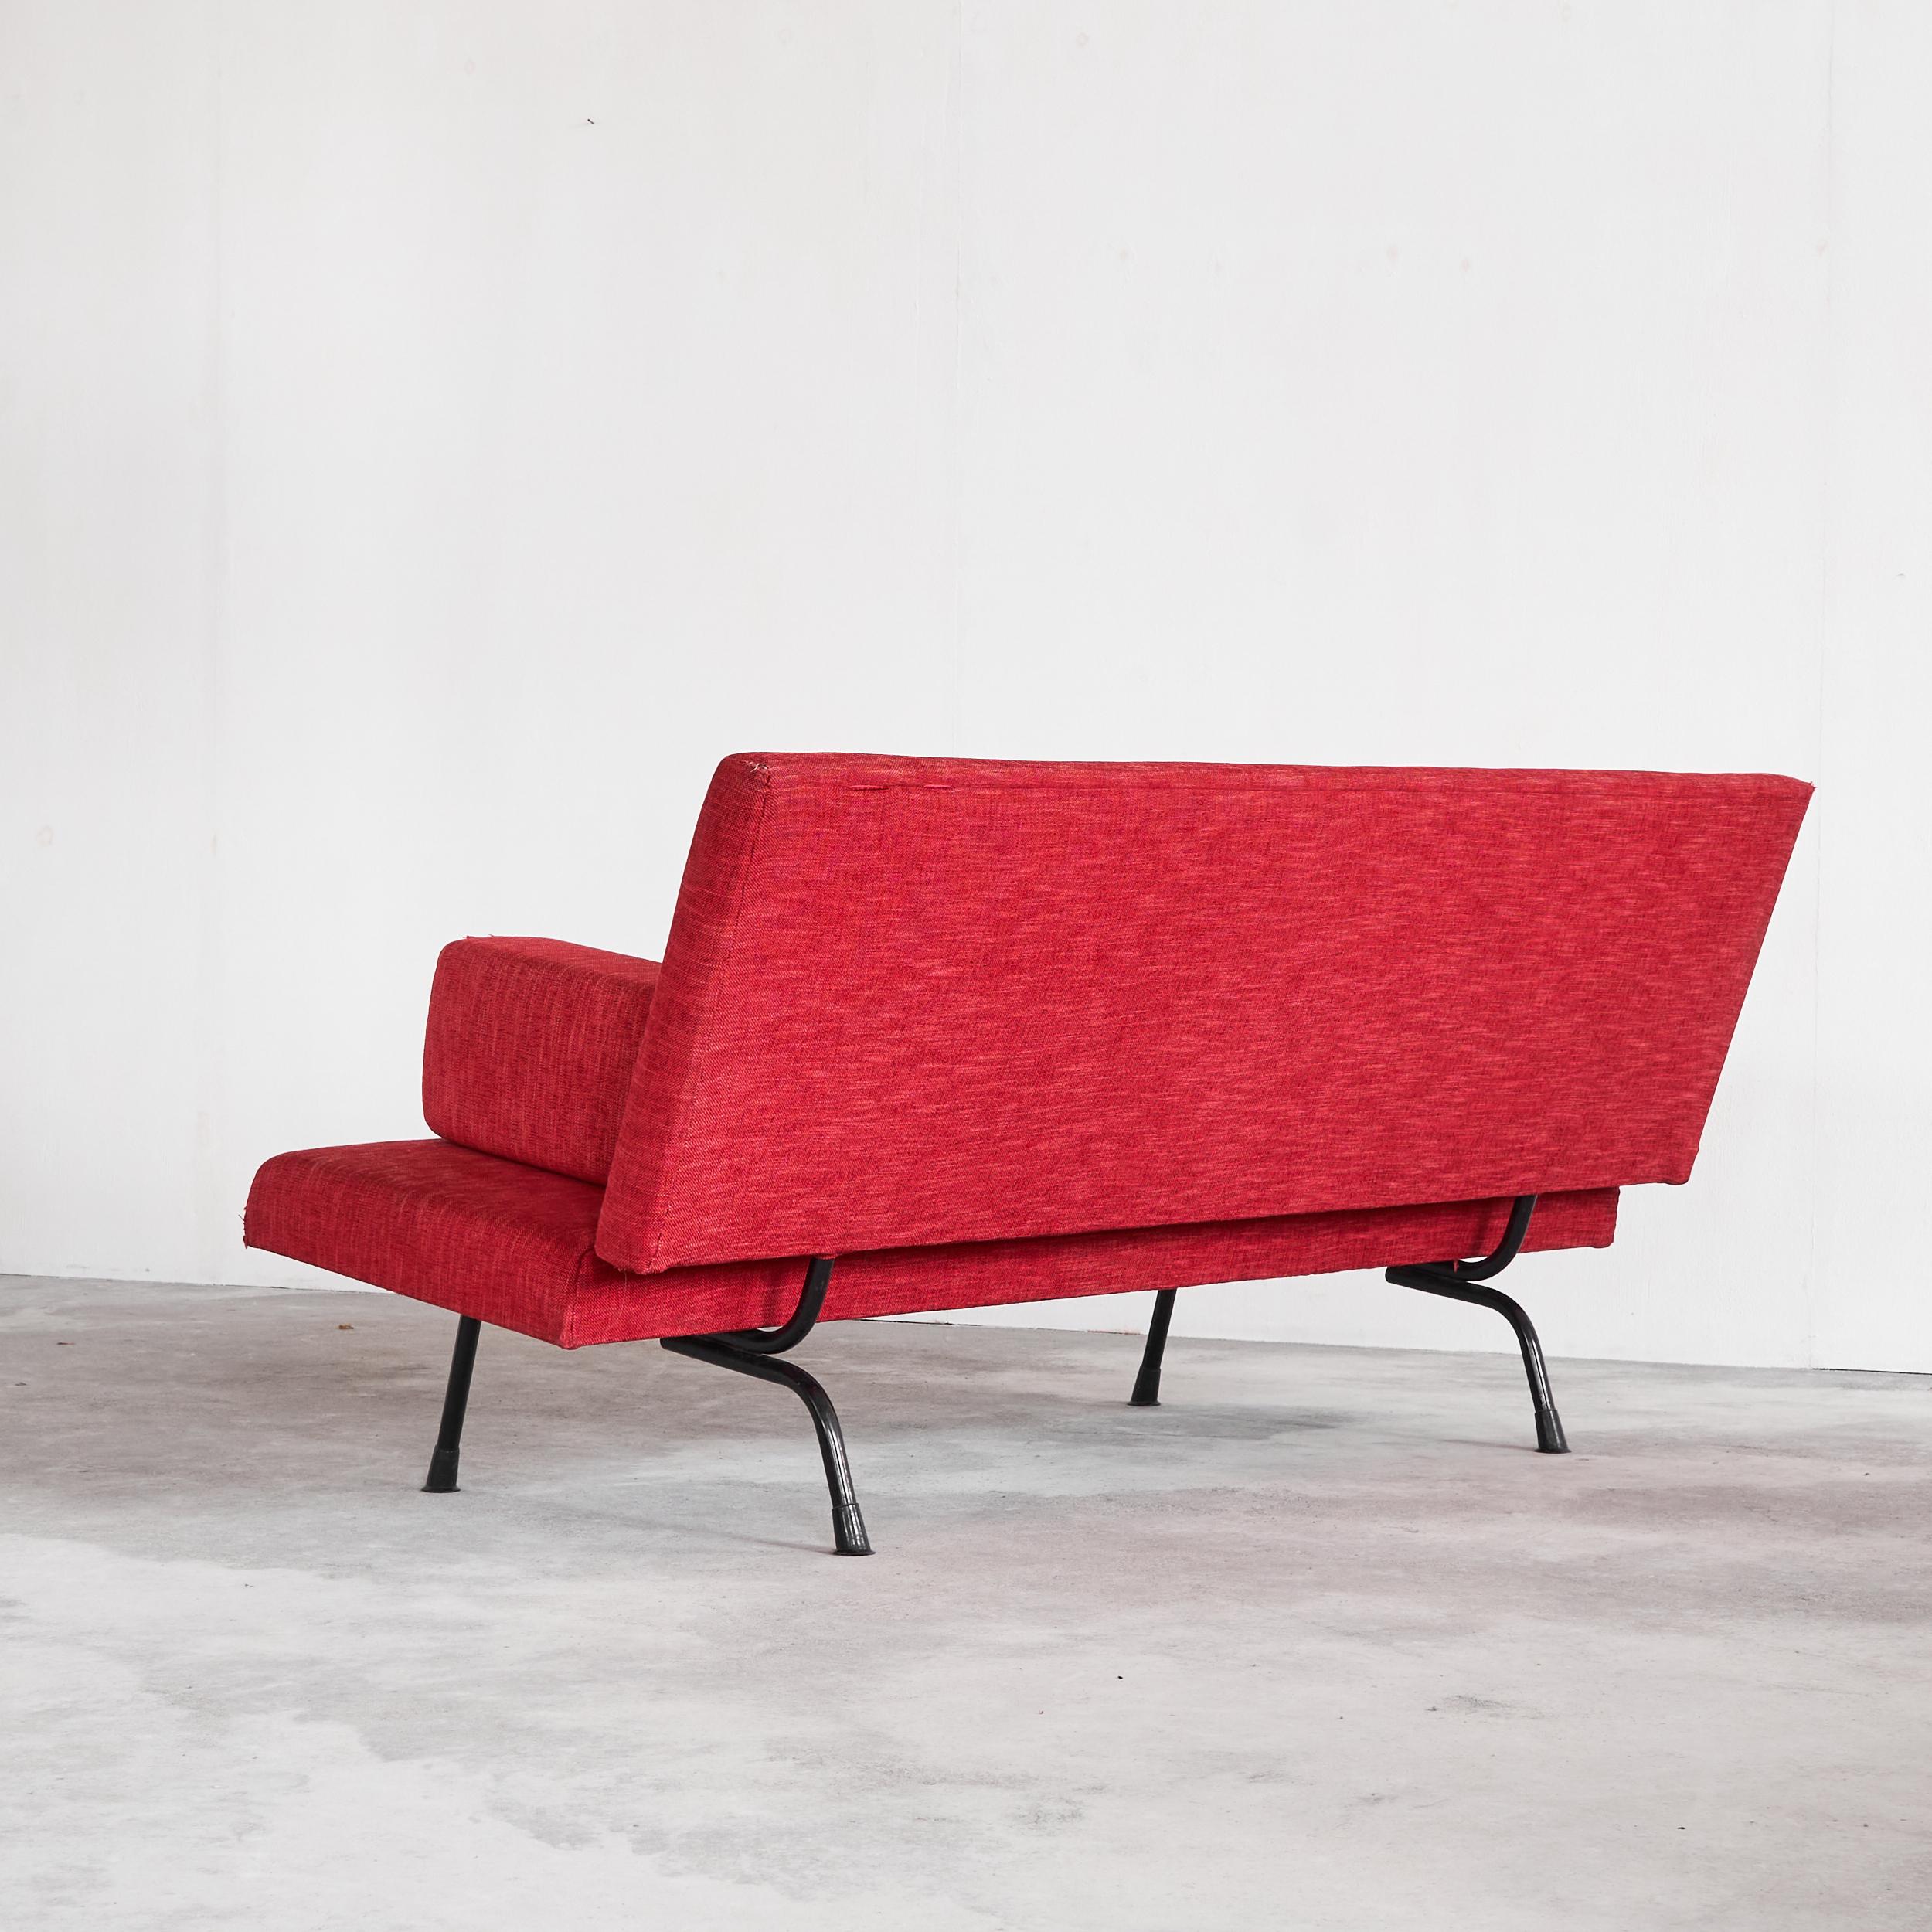 Metal Wim Rietveld '447' Sofa in Red Fabric 1950s For Sale